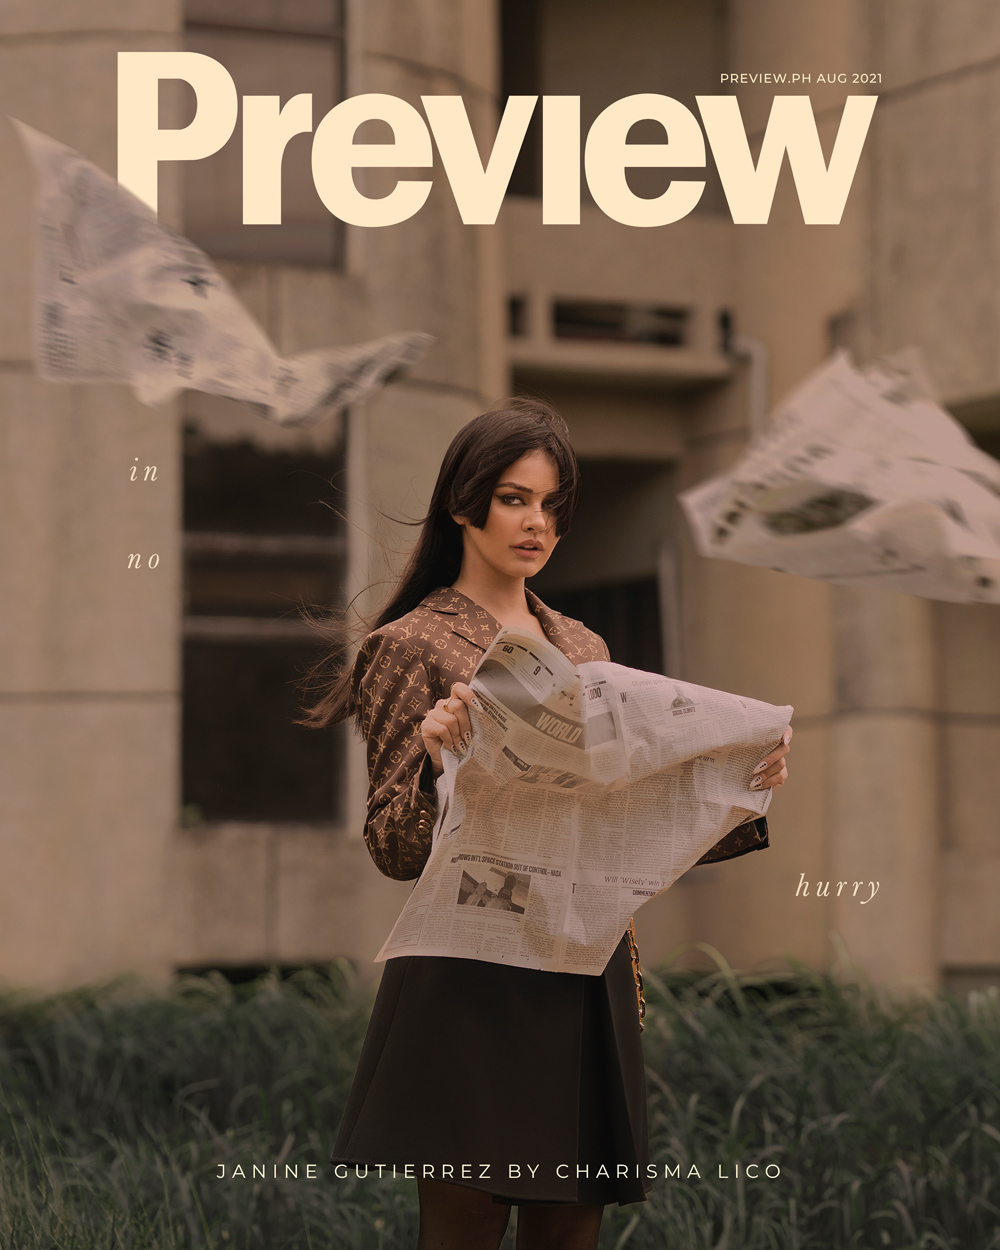 Preview August 2021 Cover Janine Gutierrez